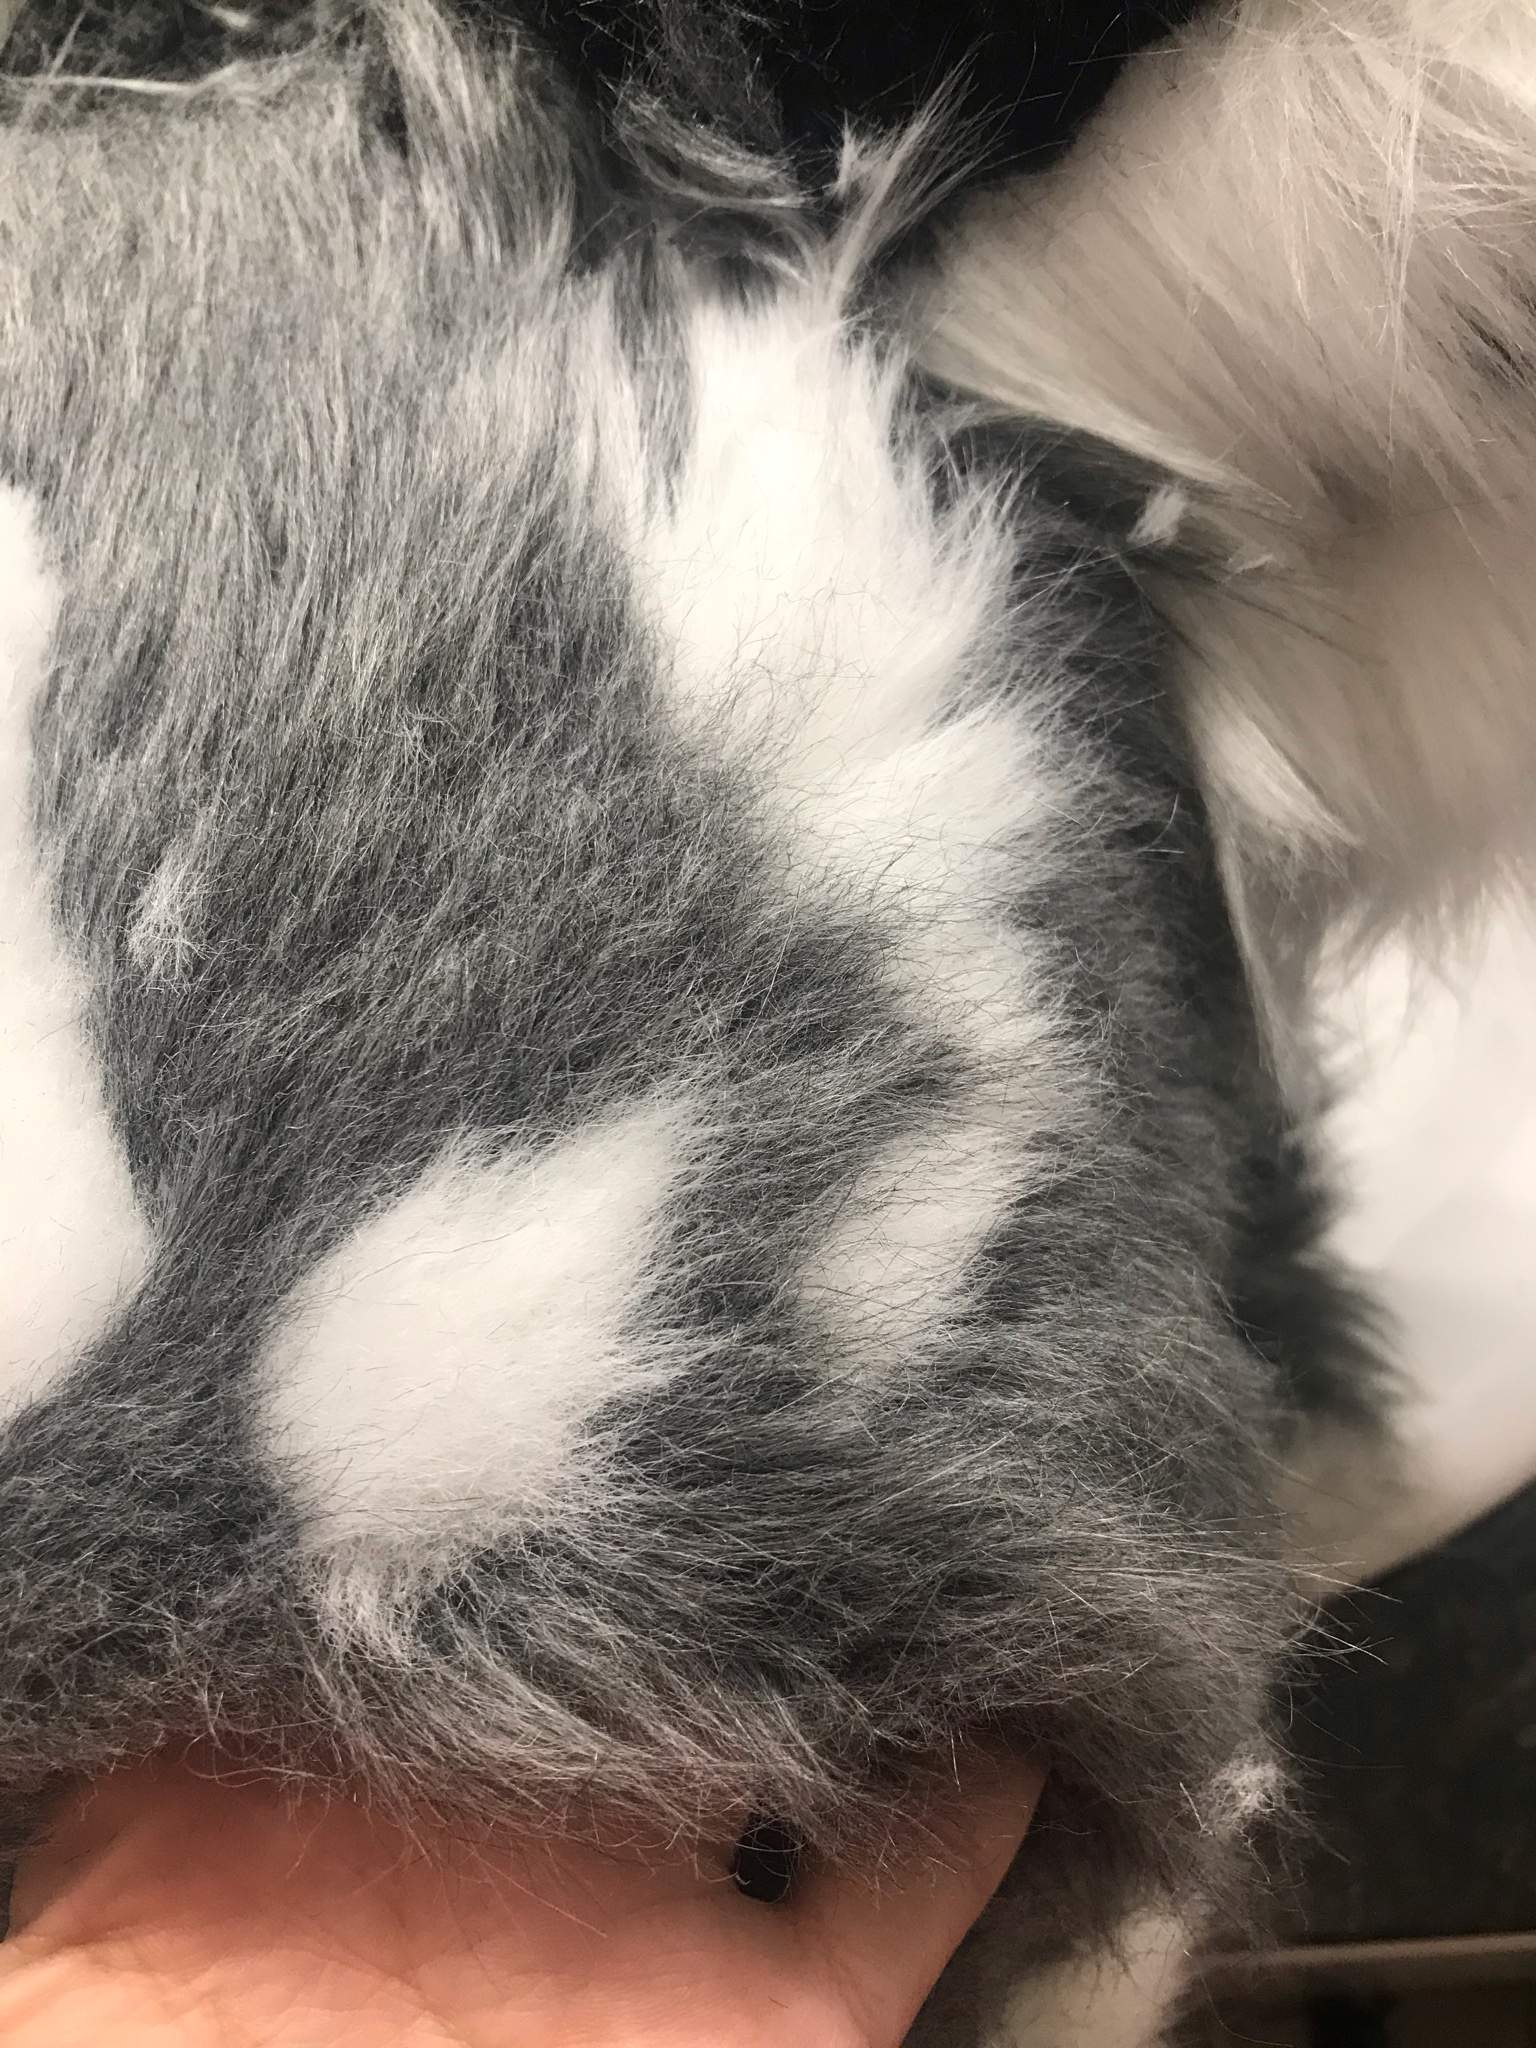 How to clean up your fursuit markings | Furry Amino